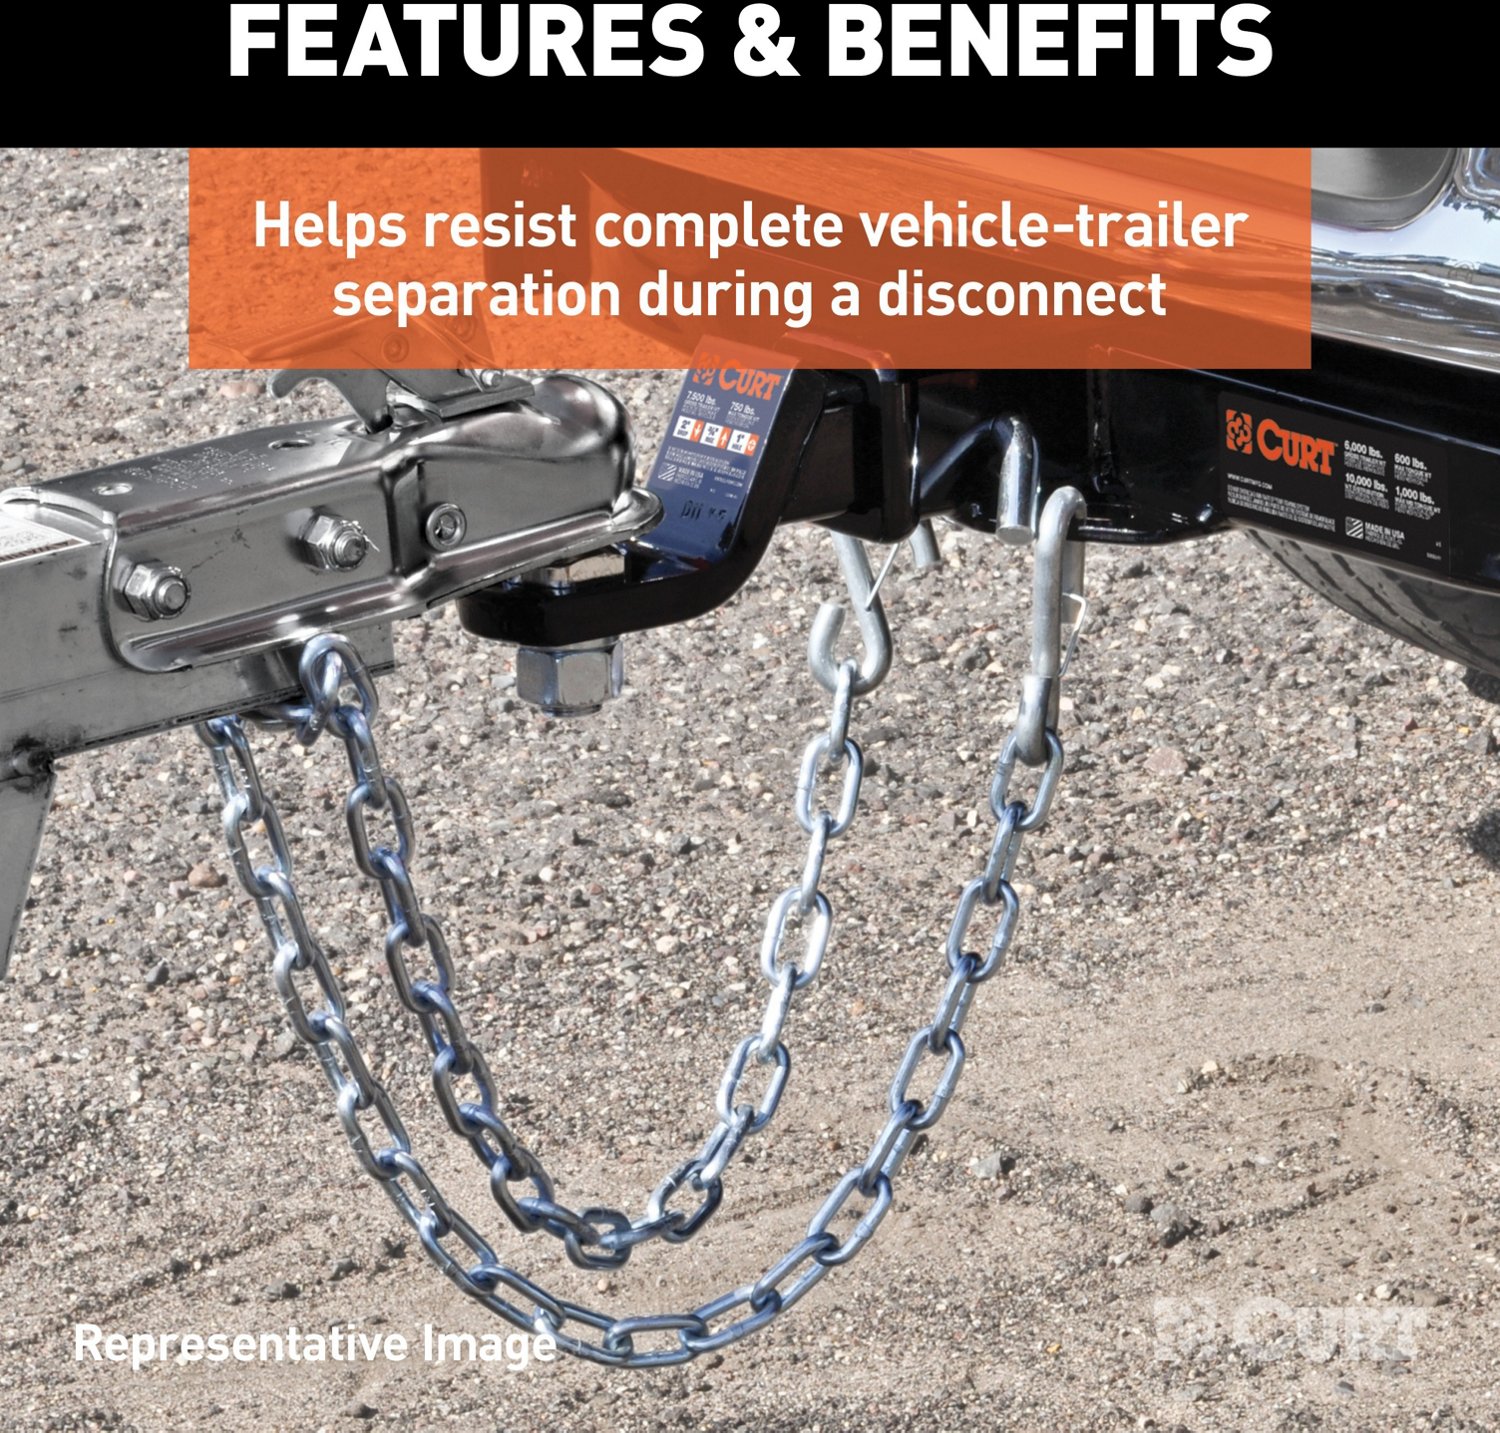 Safety Chains - Learn More